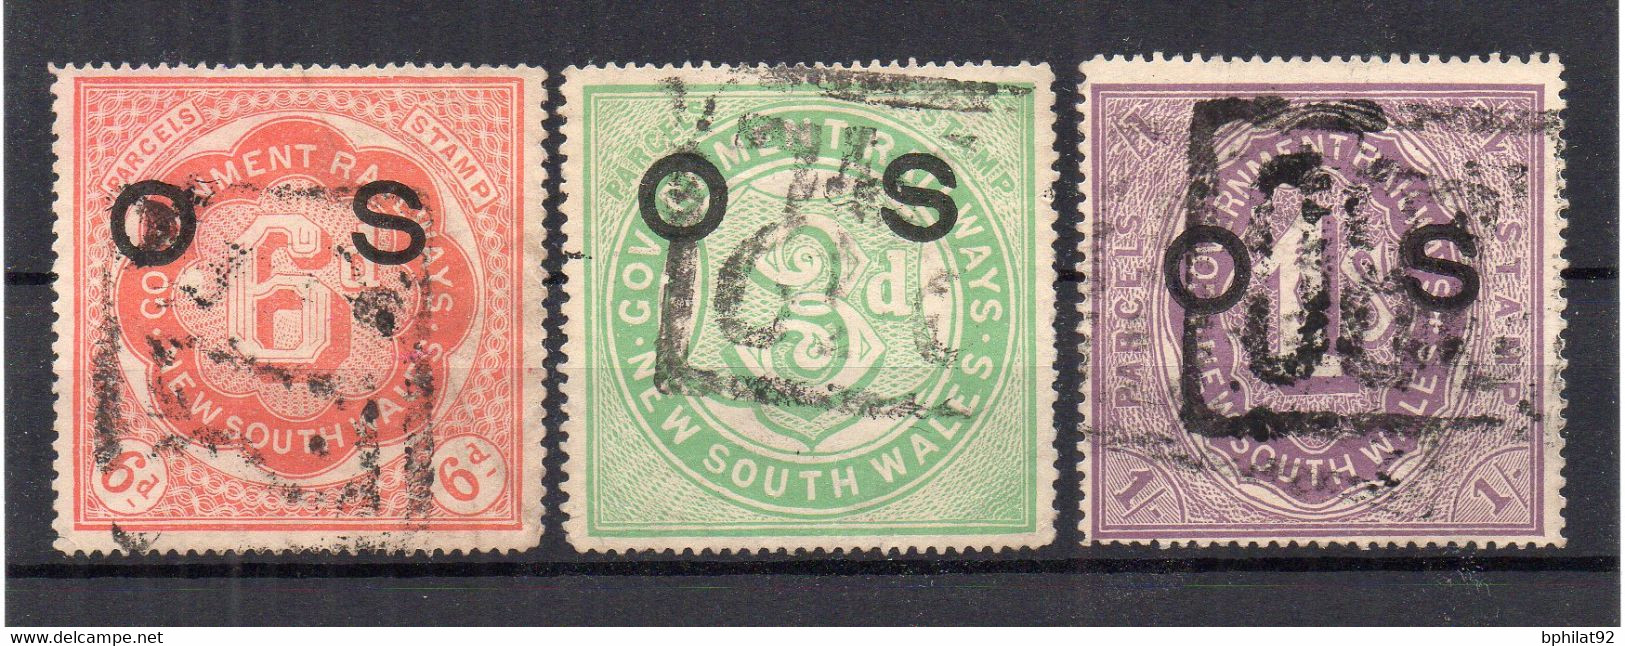 !!! NEW SOUTH WALES, 3 COLIS POSTAUX OBLITERES - Used Stamps